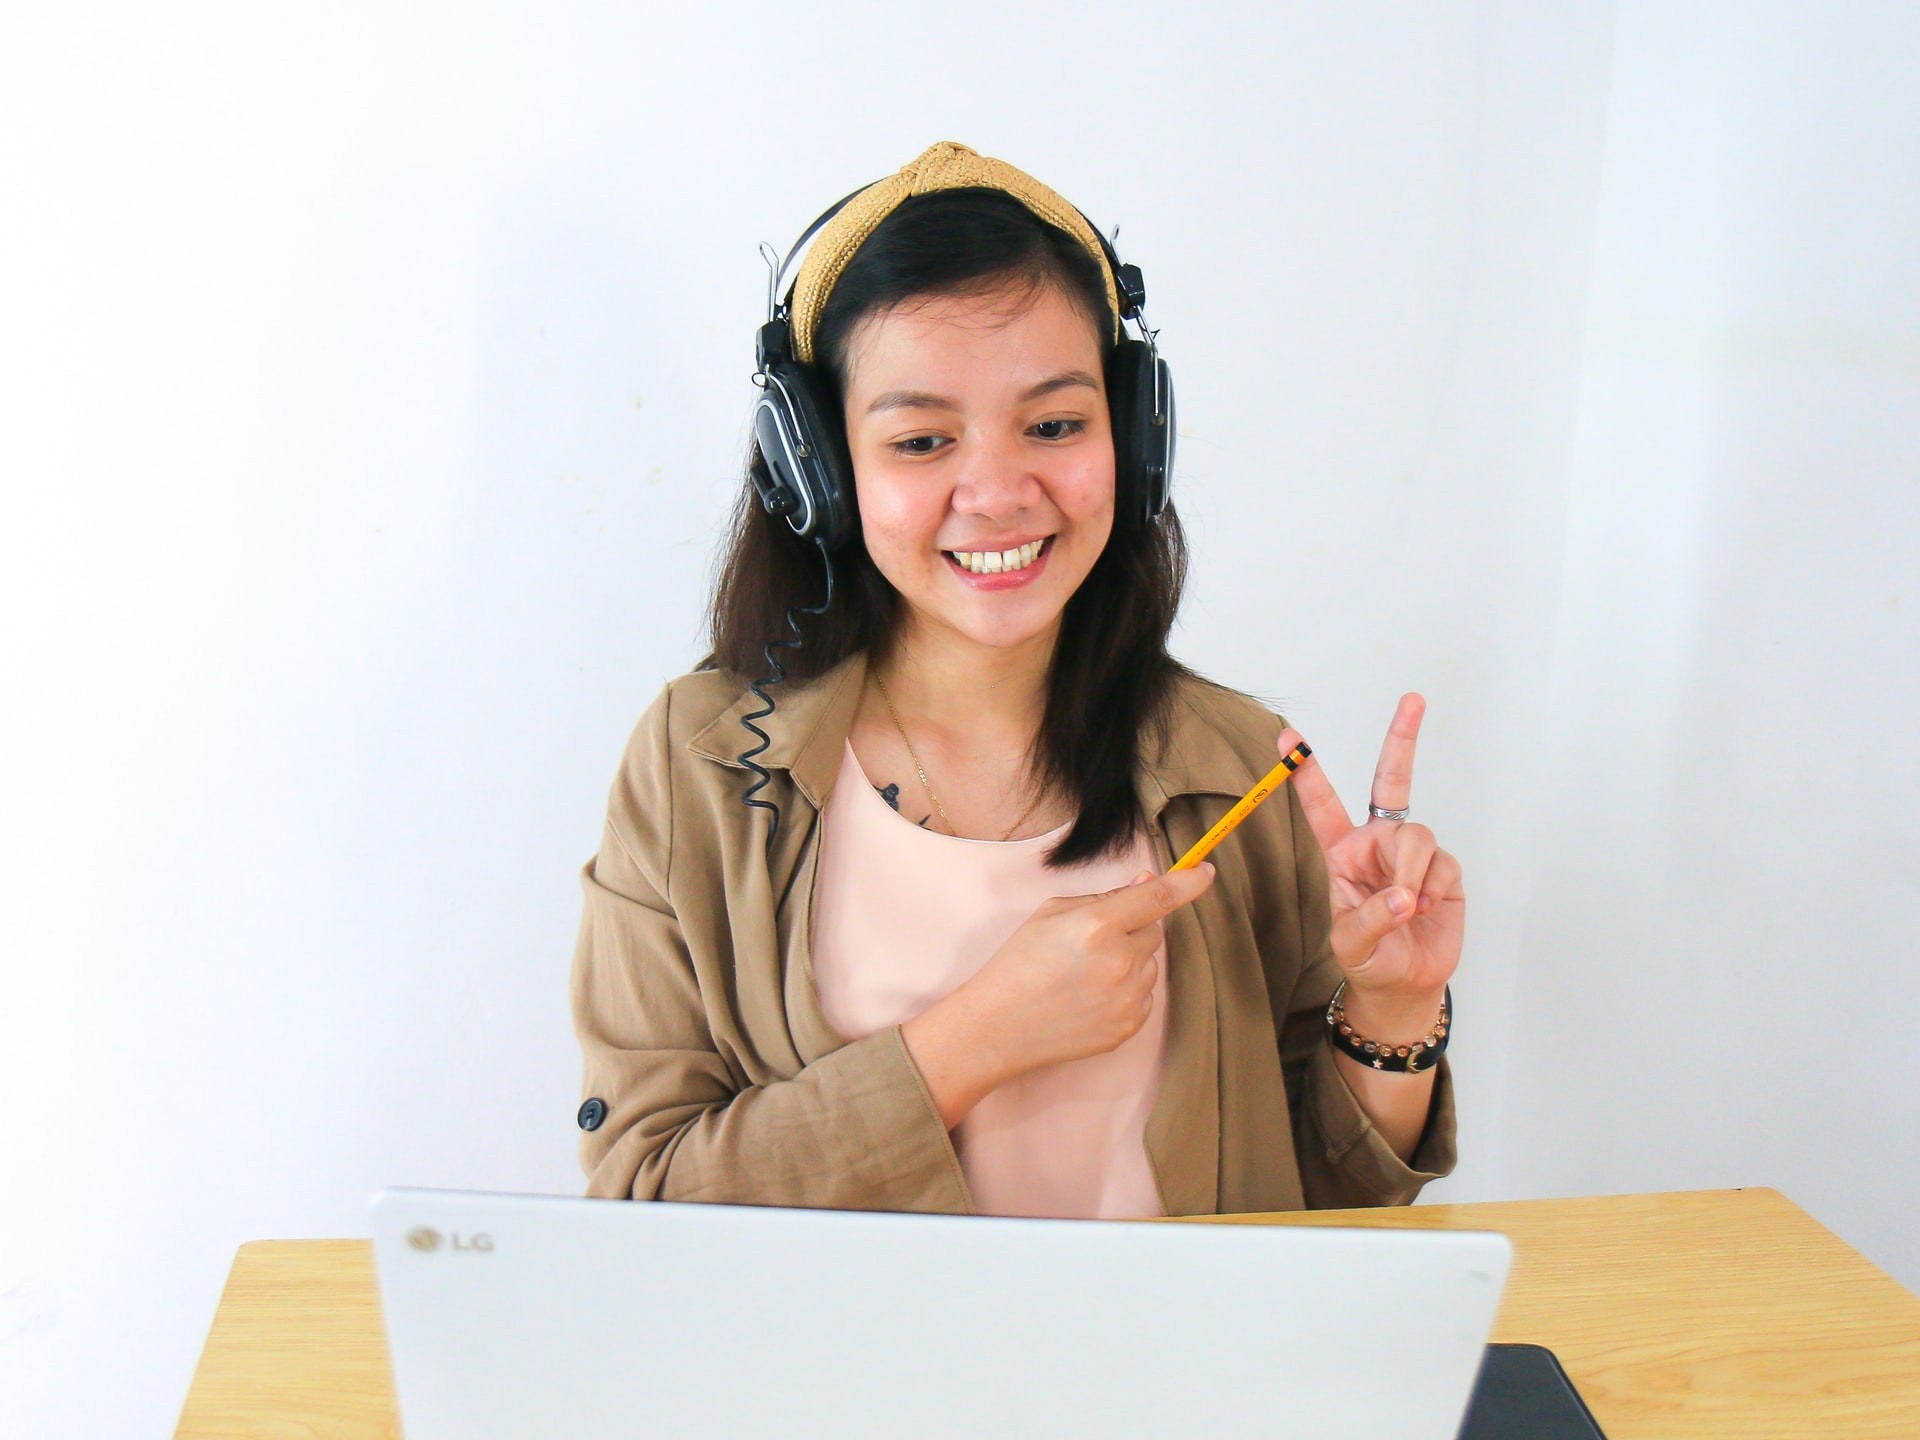 Young woman with headphones on teaches using a virtual classroom.